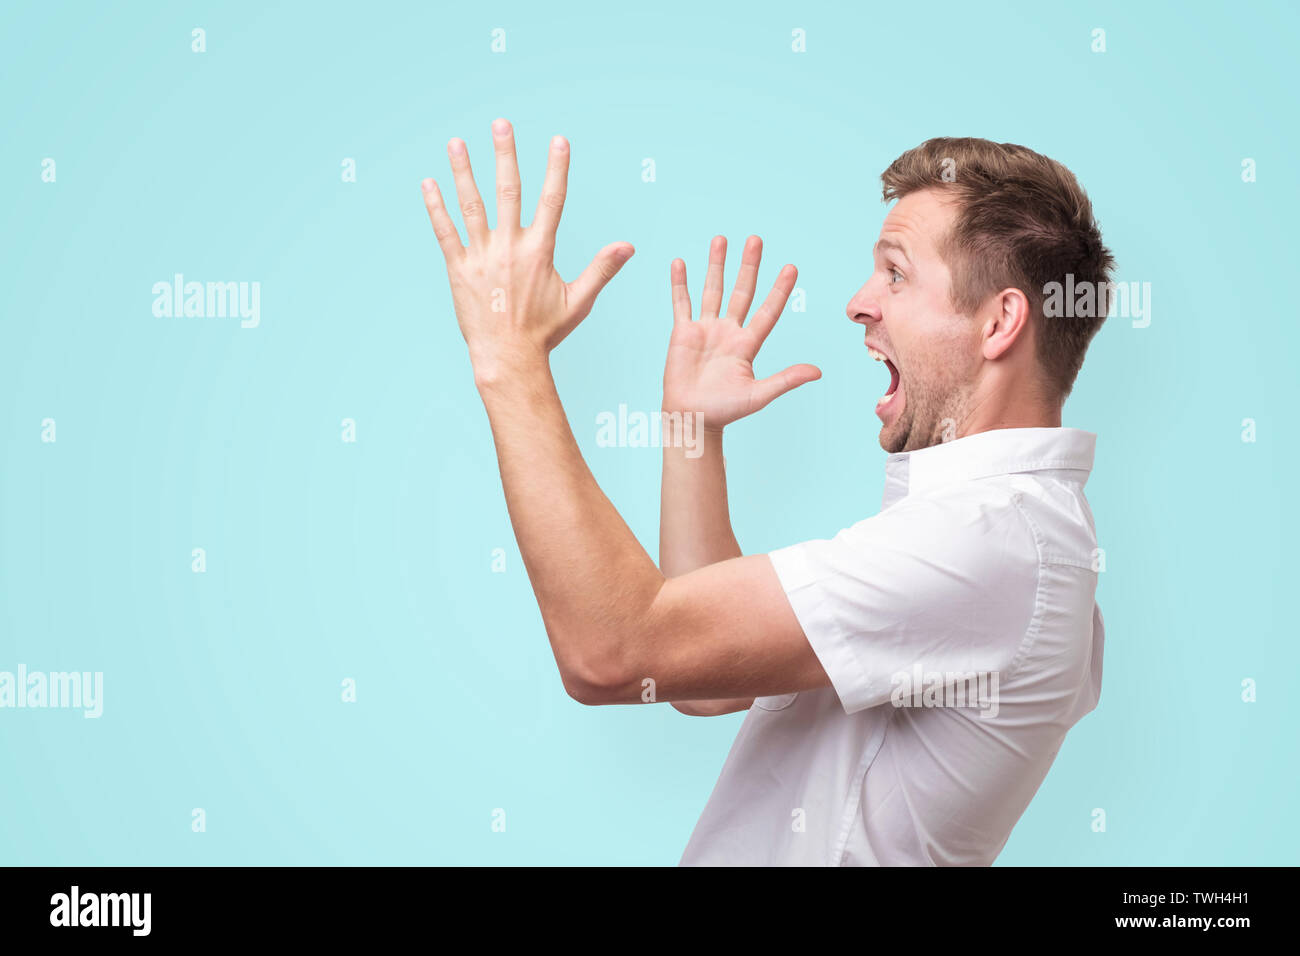 Young man screaming aside with hands gesture isolated on blue background Stock Photo